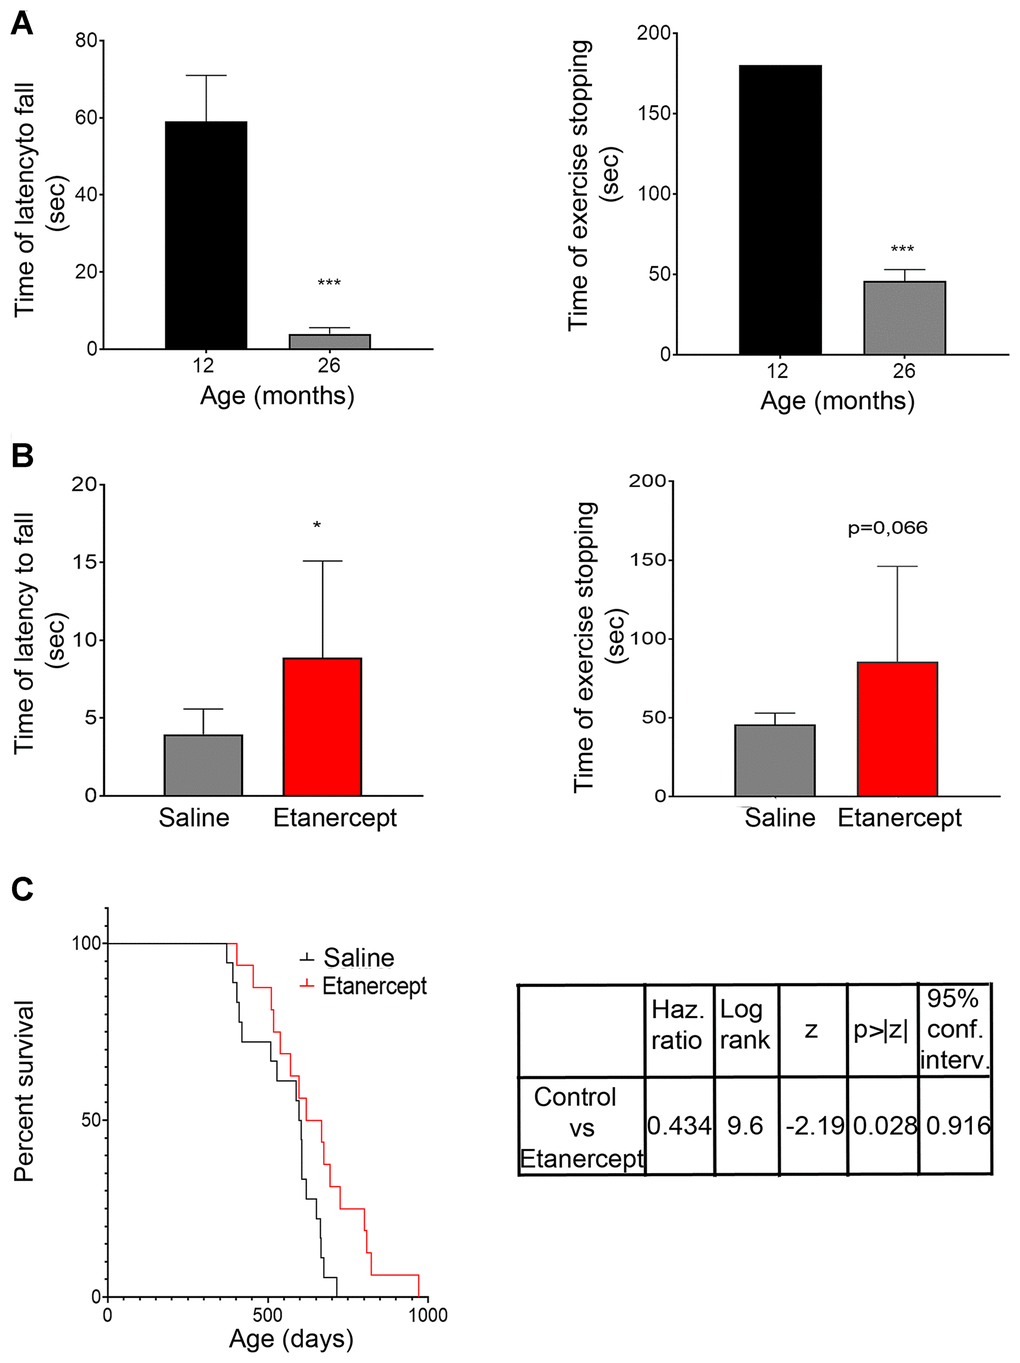 TNFα blockade inhibited muscle functional impairment during spontaneous aging and increased lifespan. (A) Mice performance during hanging wire test evaluated at 12 and 26 months of age. Both average times spent on wire between each fall (referred to as latency to fall) and the time required to complete the exercise (referred to as time of exercise stopping) were measured. ***= pB) Measurements obtained for control (saline) or Etanercept-treated mice evaluated at 26 months of age. *= pC) Kaplan-Meyer survival curve comparing control and Etanercept-treated mice.